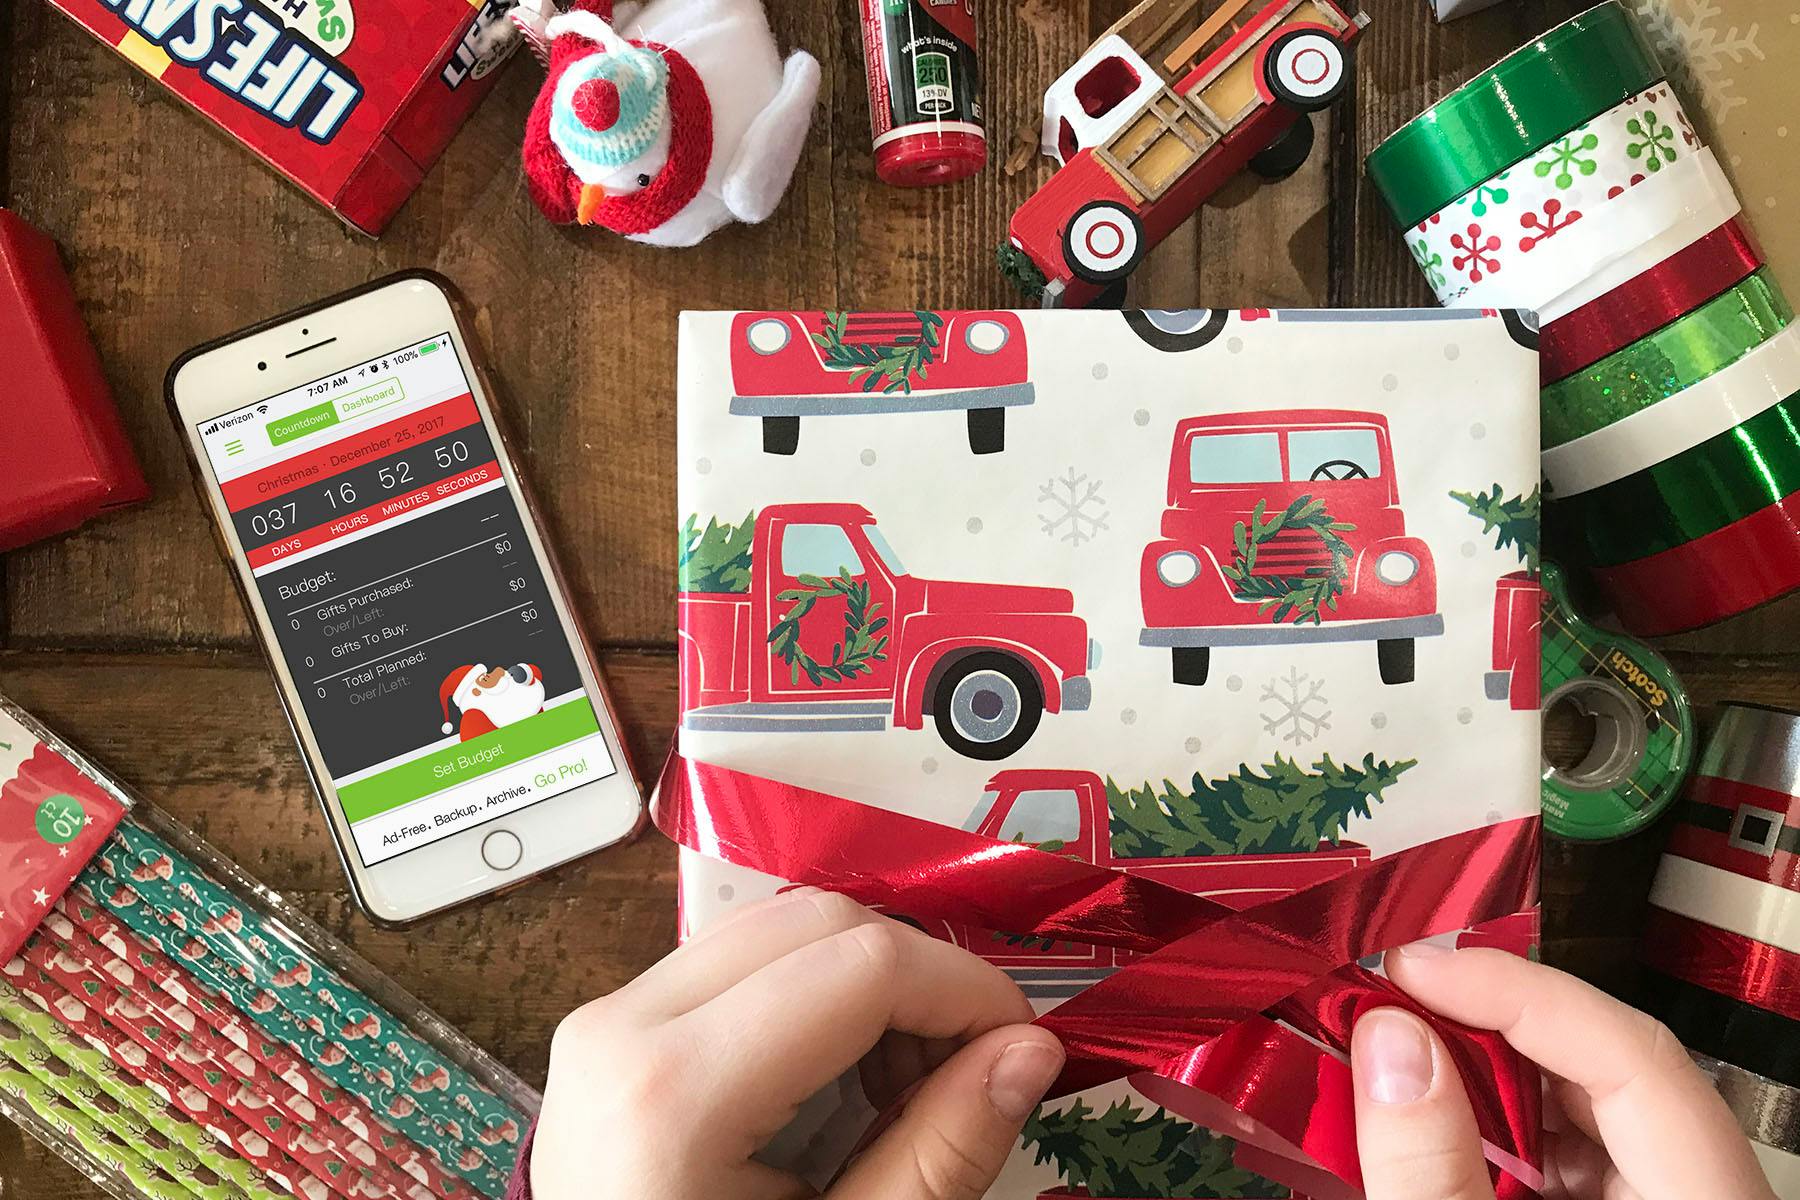 A gift being wrapped with a cell phone beside it displaying the Santas's bag gift tracking app.